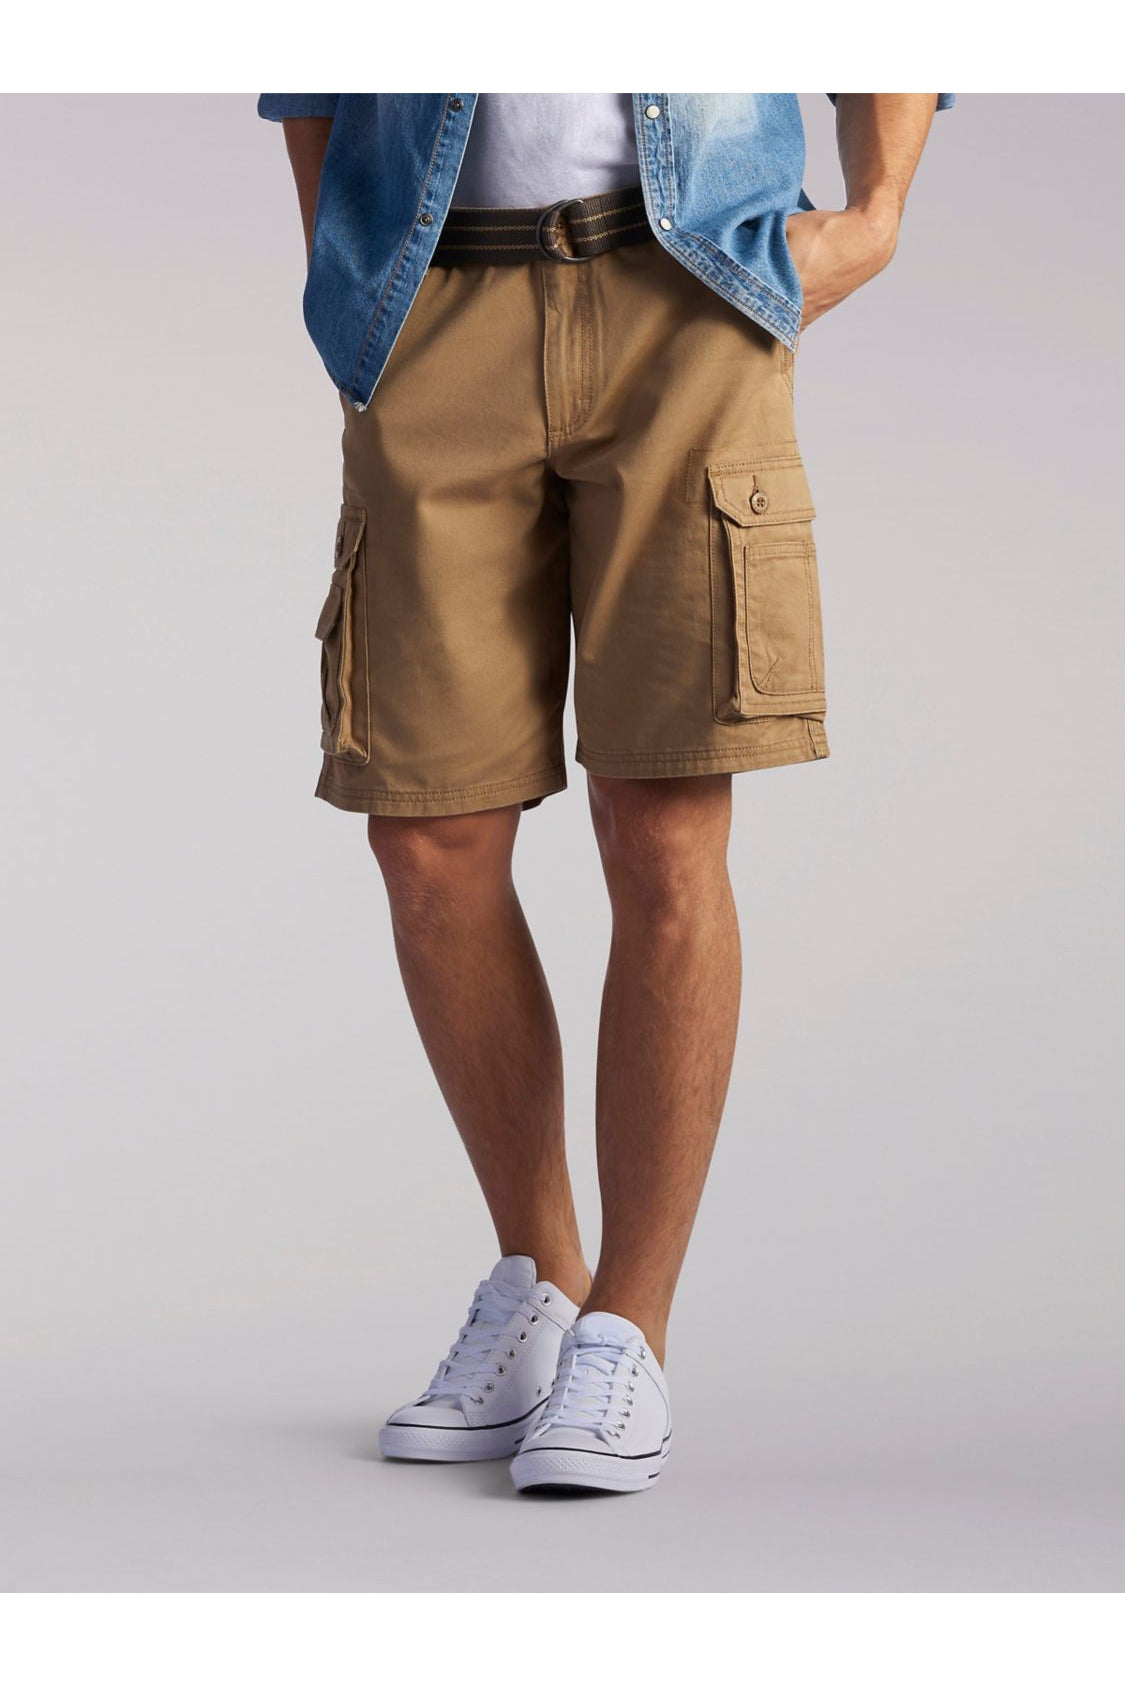 Big and Tall Wyoming Cargo Short in Bourbon from Front View